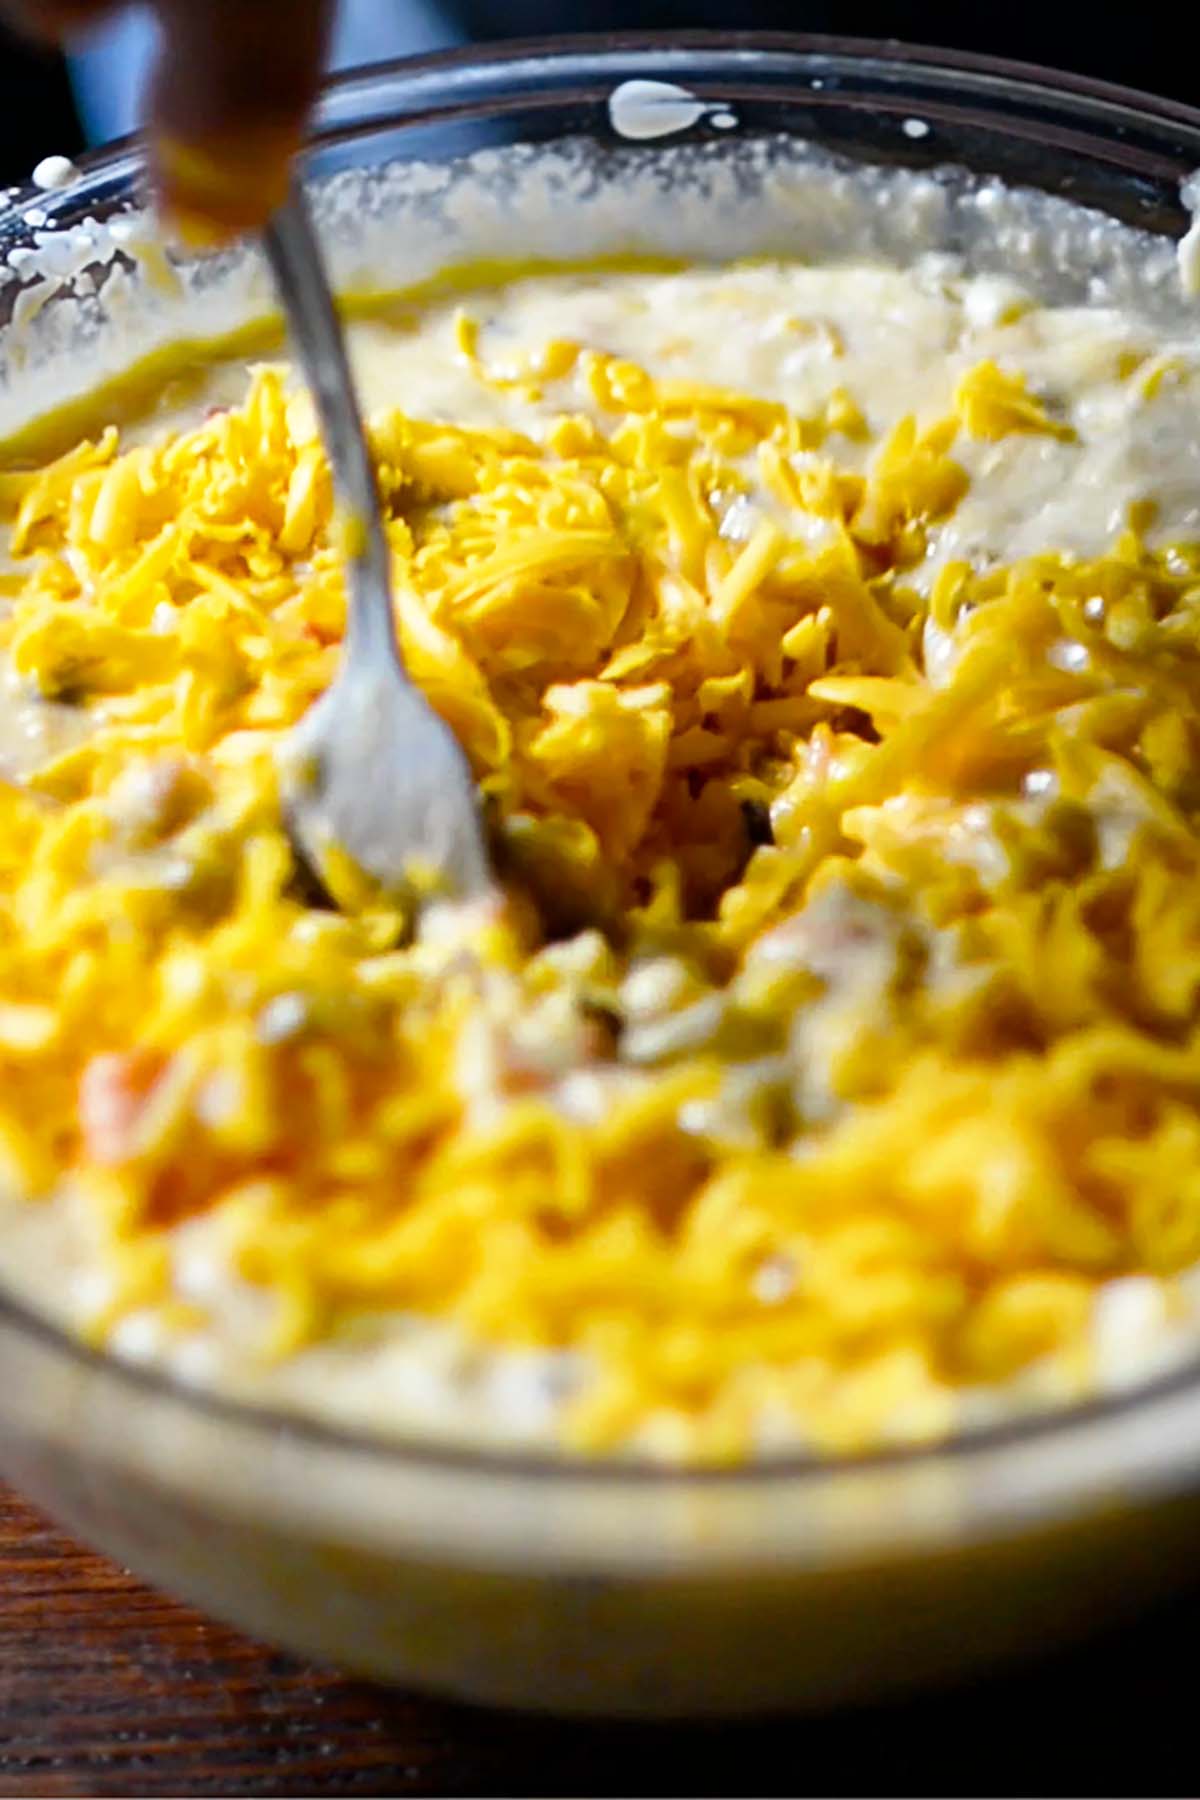 Shredded cheese being added to a corn pudding mixture in a glass mixing bowl.